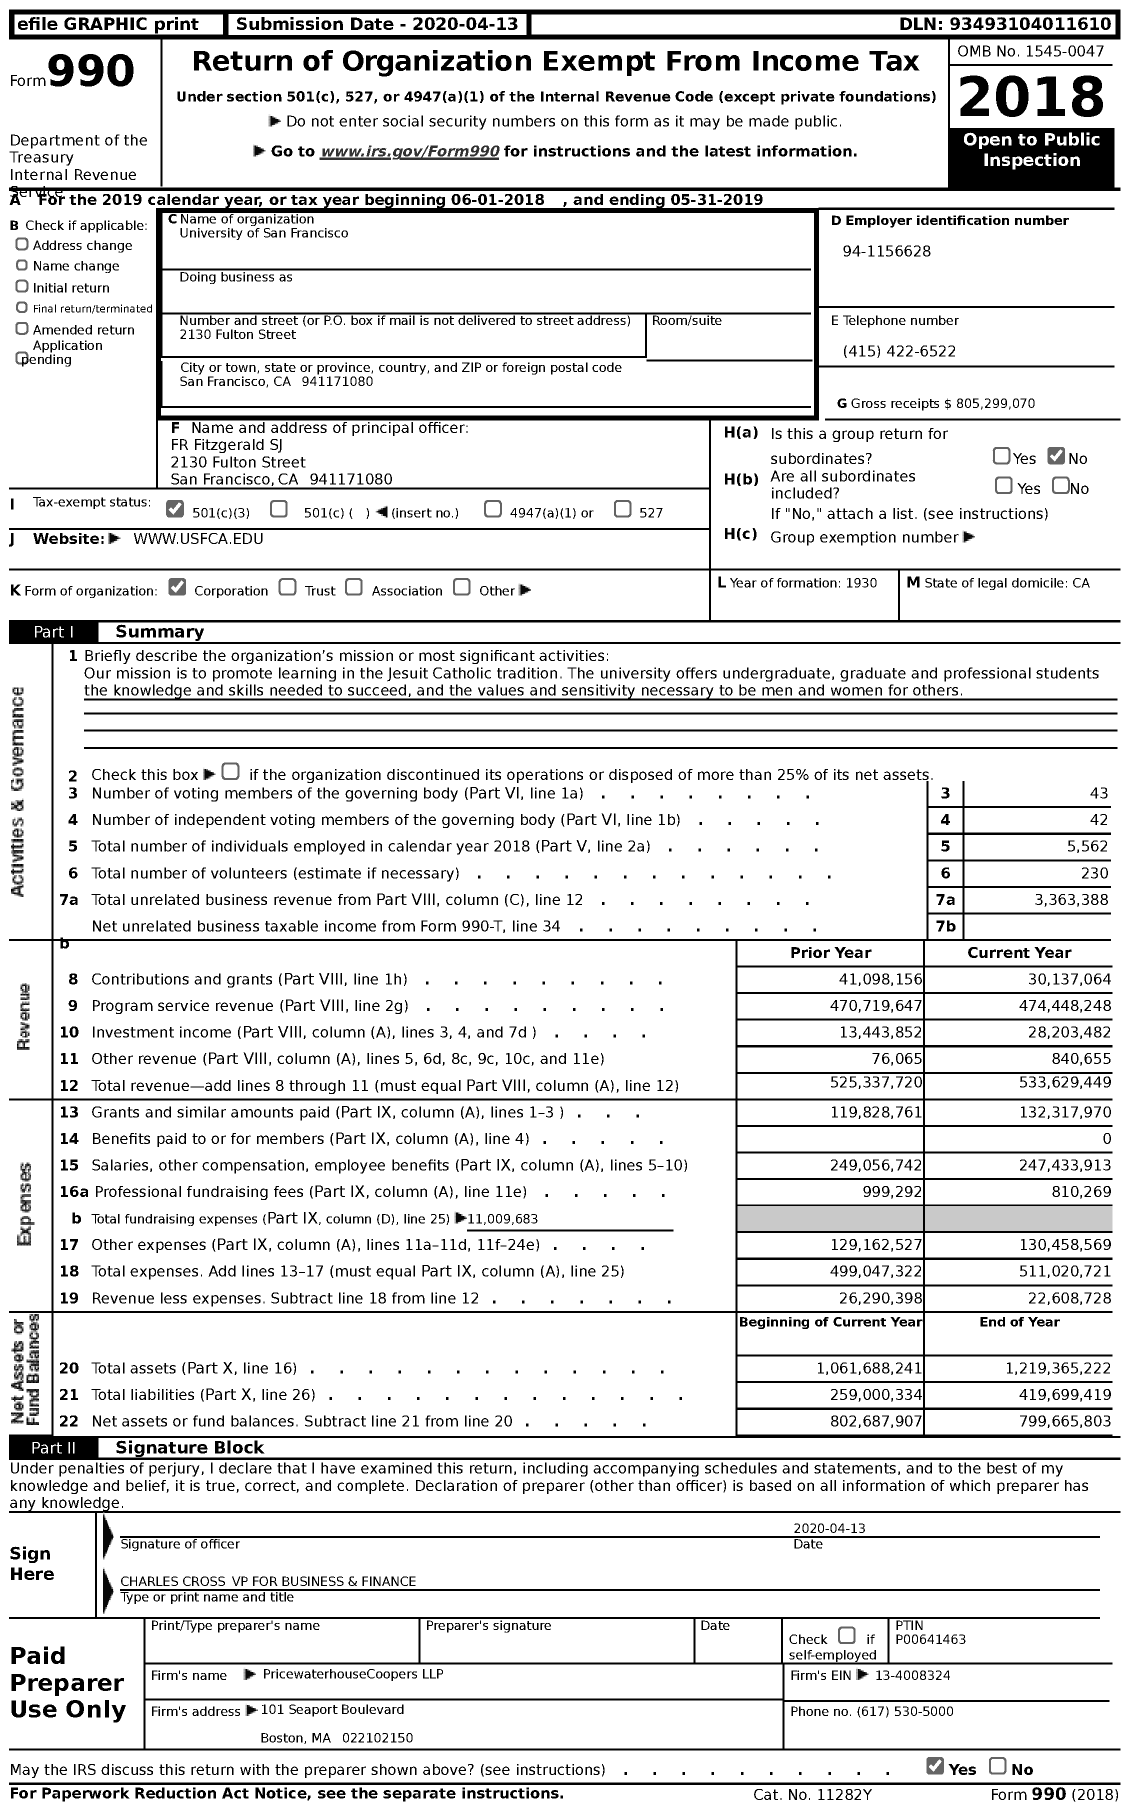 Image of first page of 2018 Form 990 for University of San Francisco (USF)